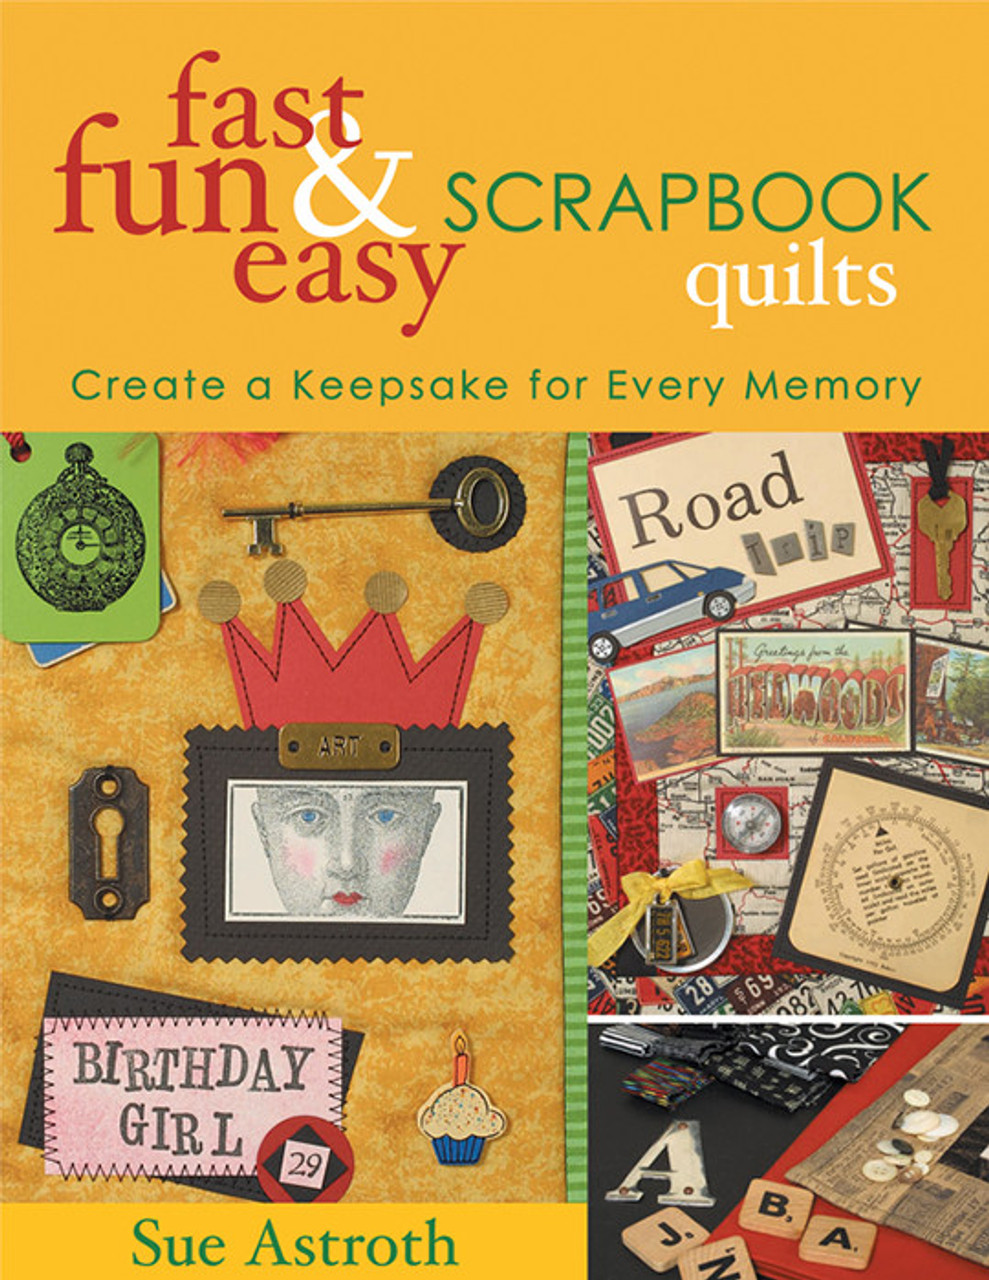 How Scrapbooking Made Simple uses Creative Imaginations